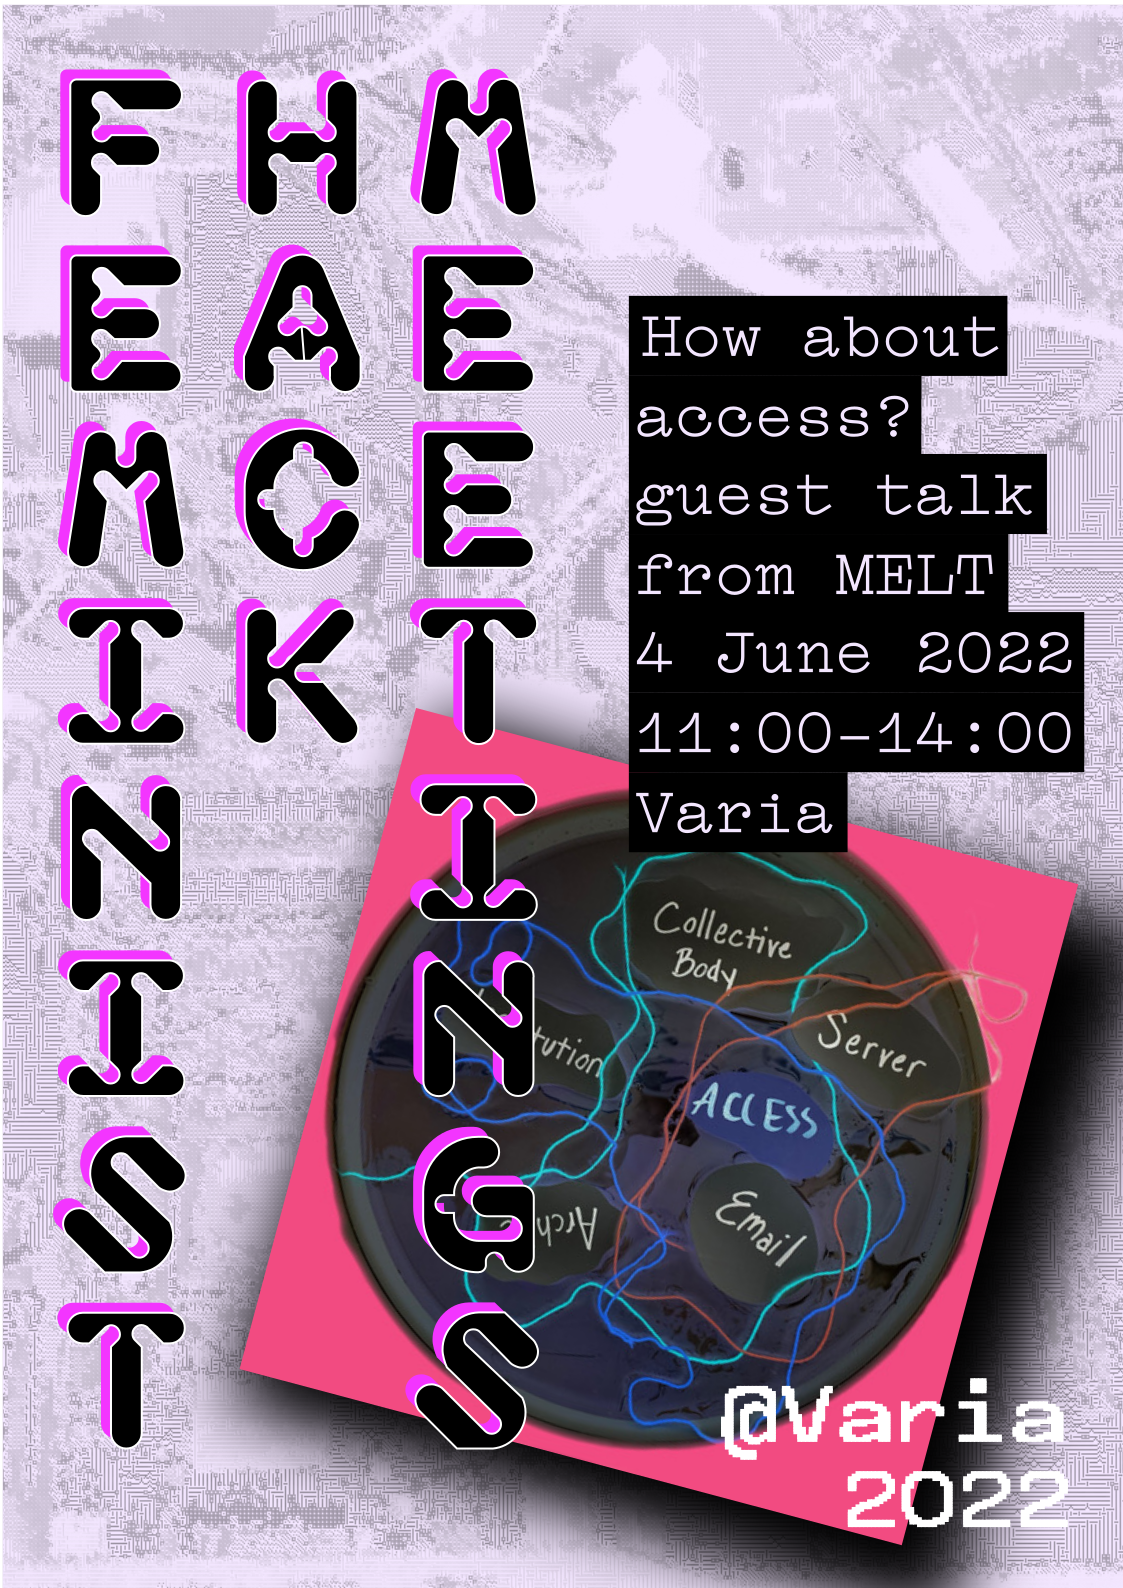 A generated FHM poster. On the left side, the words "Feminist", "Hack", "Meetings" are written vertically. On the right side a text that reads, How about access? Guest talk from MELT. June 4 2022, 11:00 to 14:00, Varia. The poster includes an image from MELT showing a dark circle inside which there are coloured lines like strings, with the handwritten words “Collective Body”, “Server”, “Institution”, “Access”, “Email” and “Archive”.